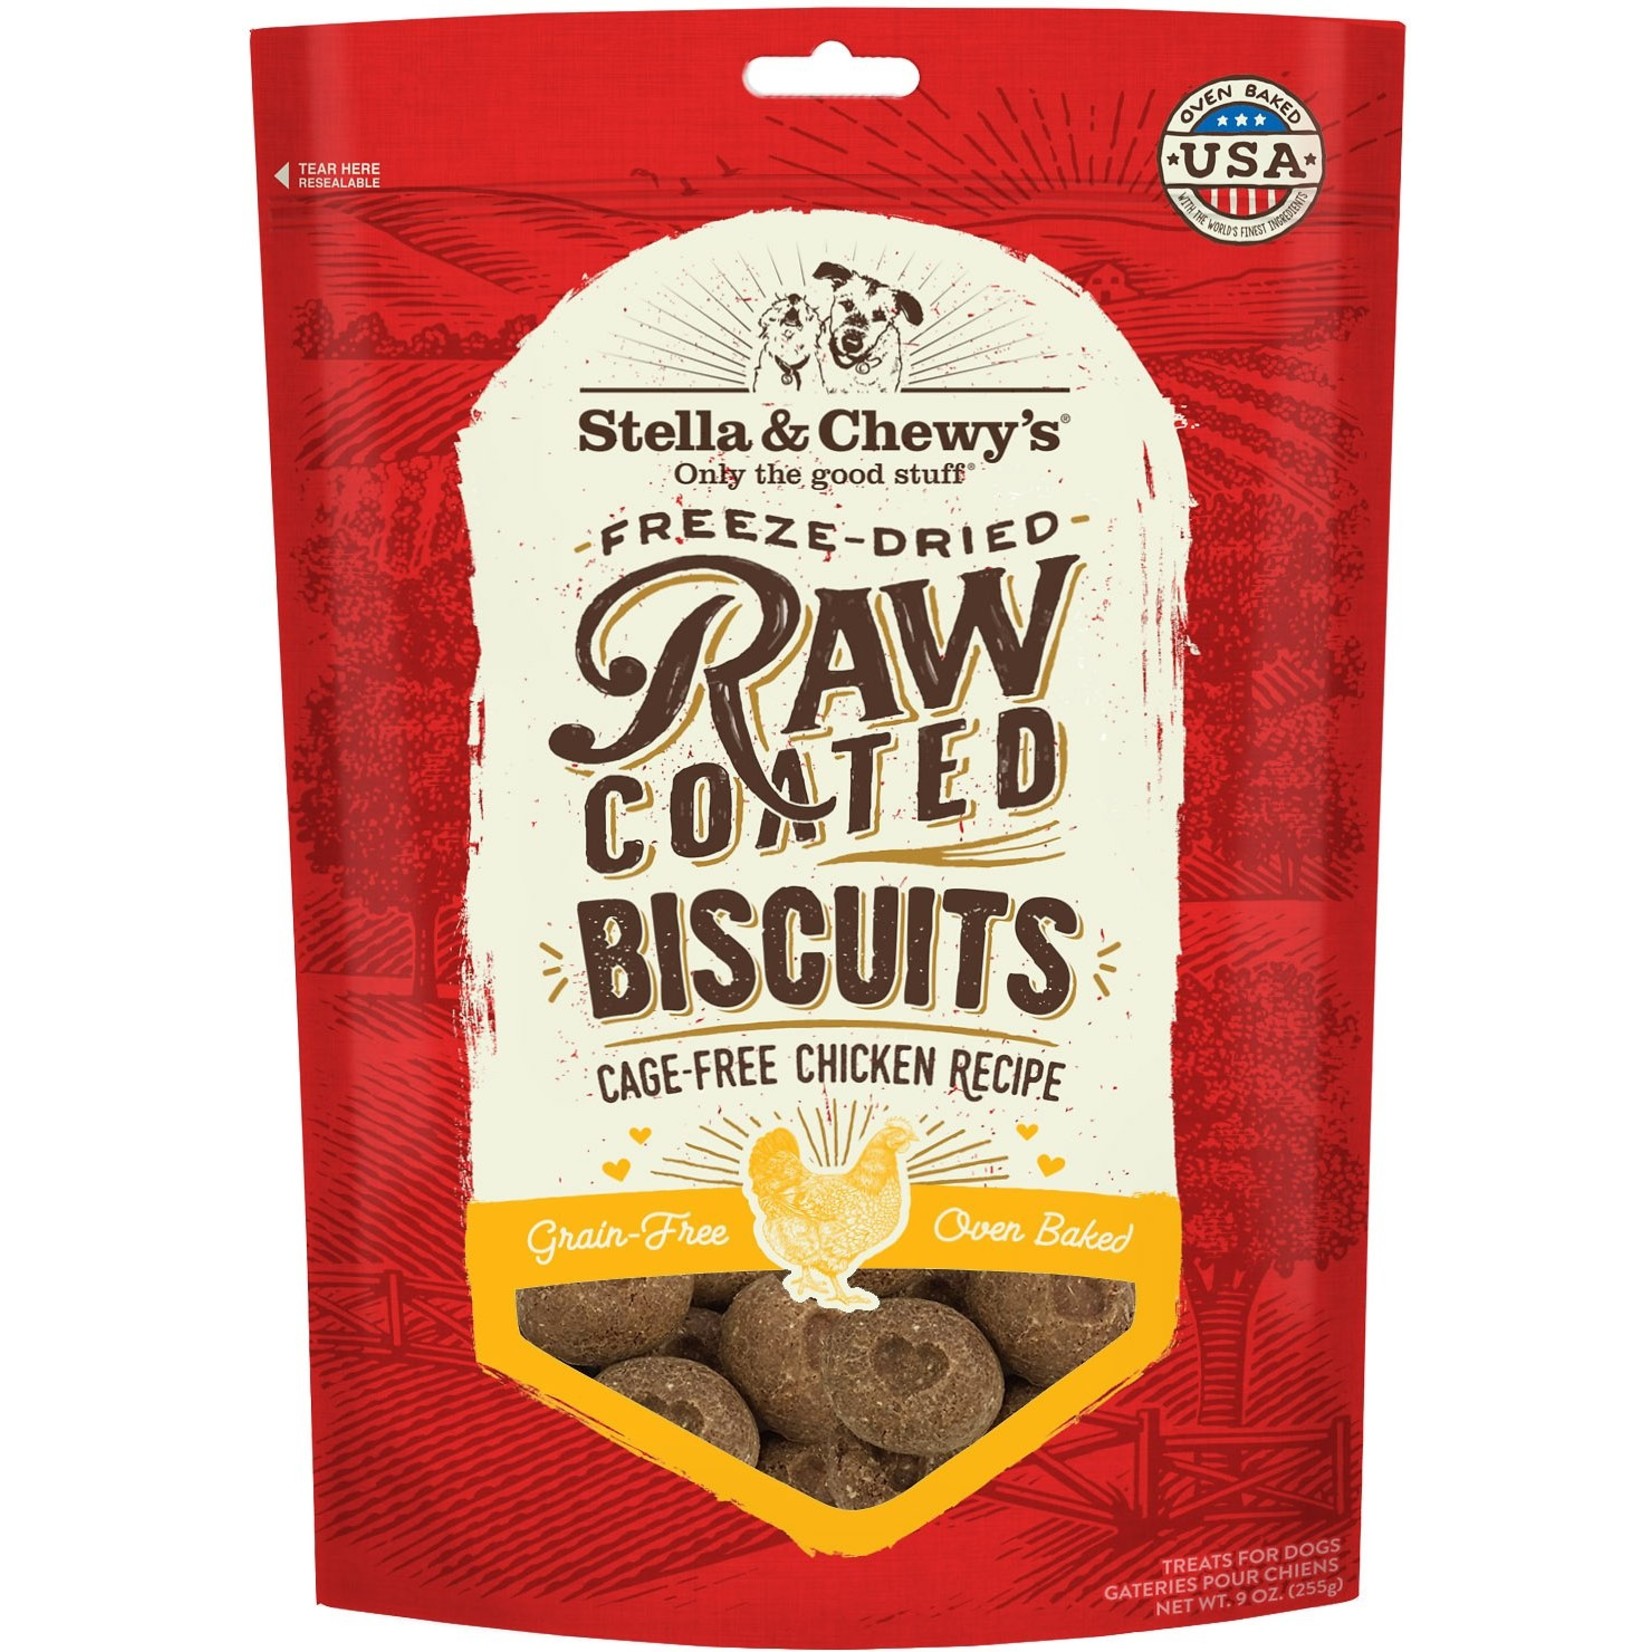 Stella & Chewy's Stella & Chewy's Raw Coated Biscuits - Cage-Free Chicken Recipe